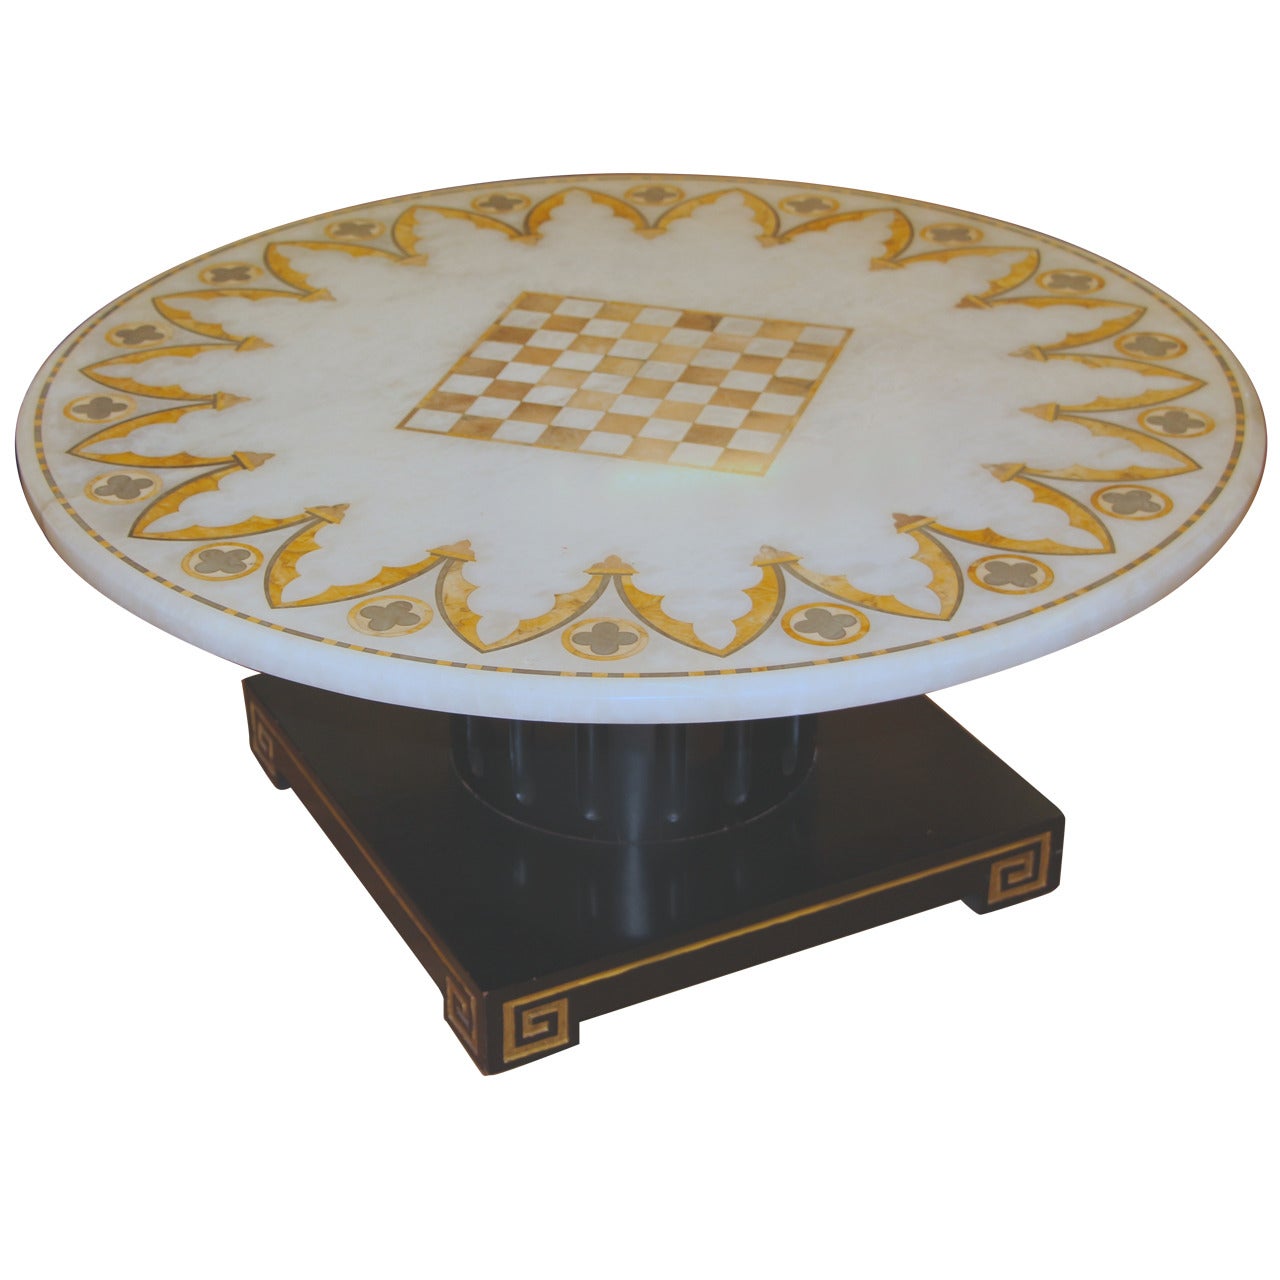 Pietra Dura Marble Inlaid Table on Fluted Greek Key Base